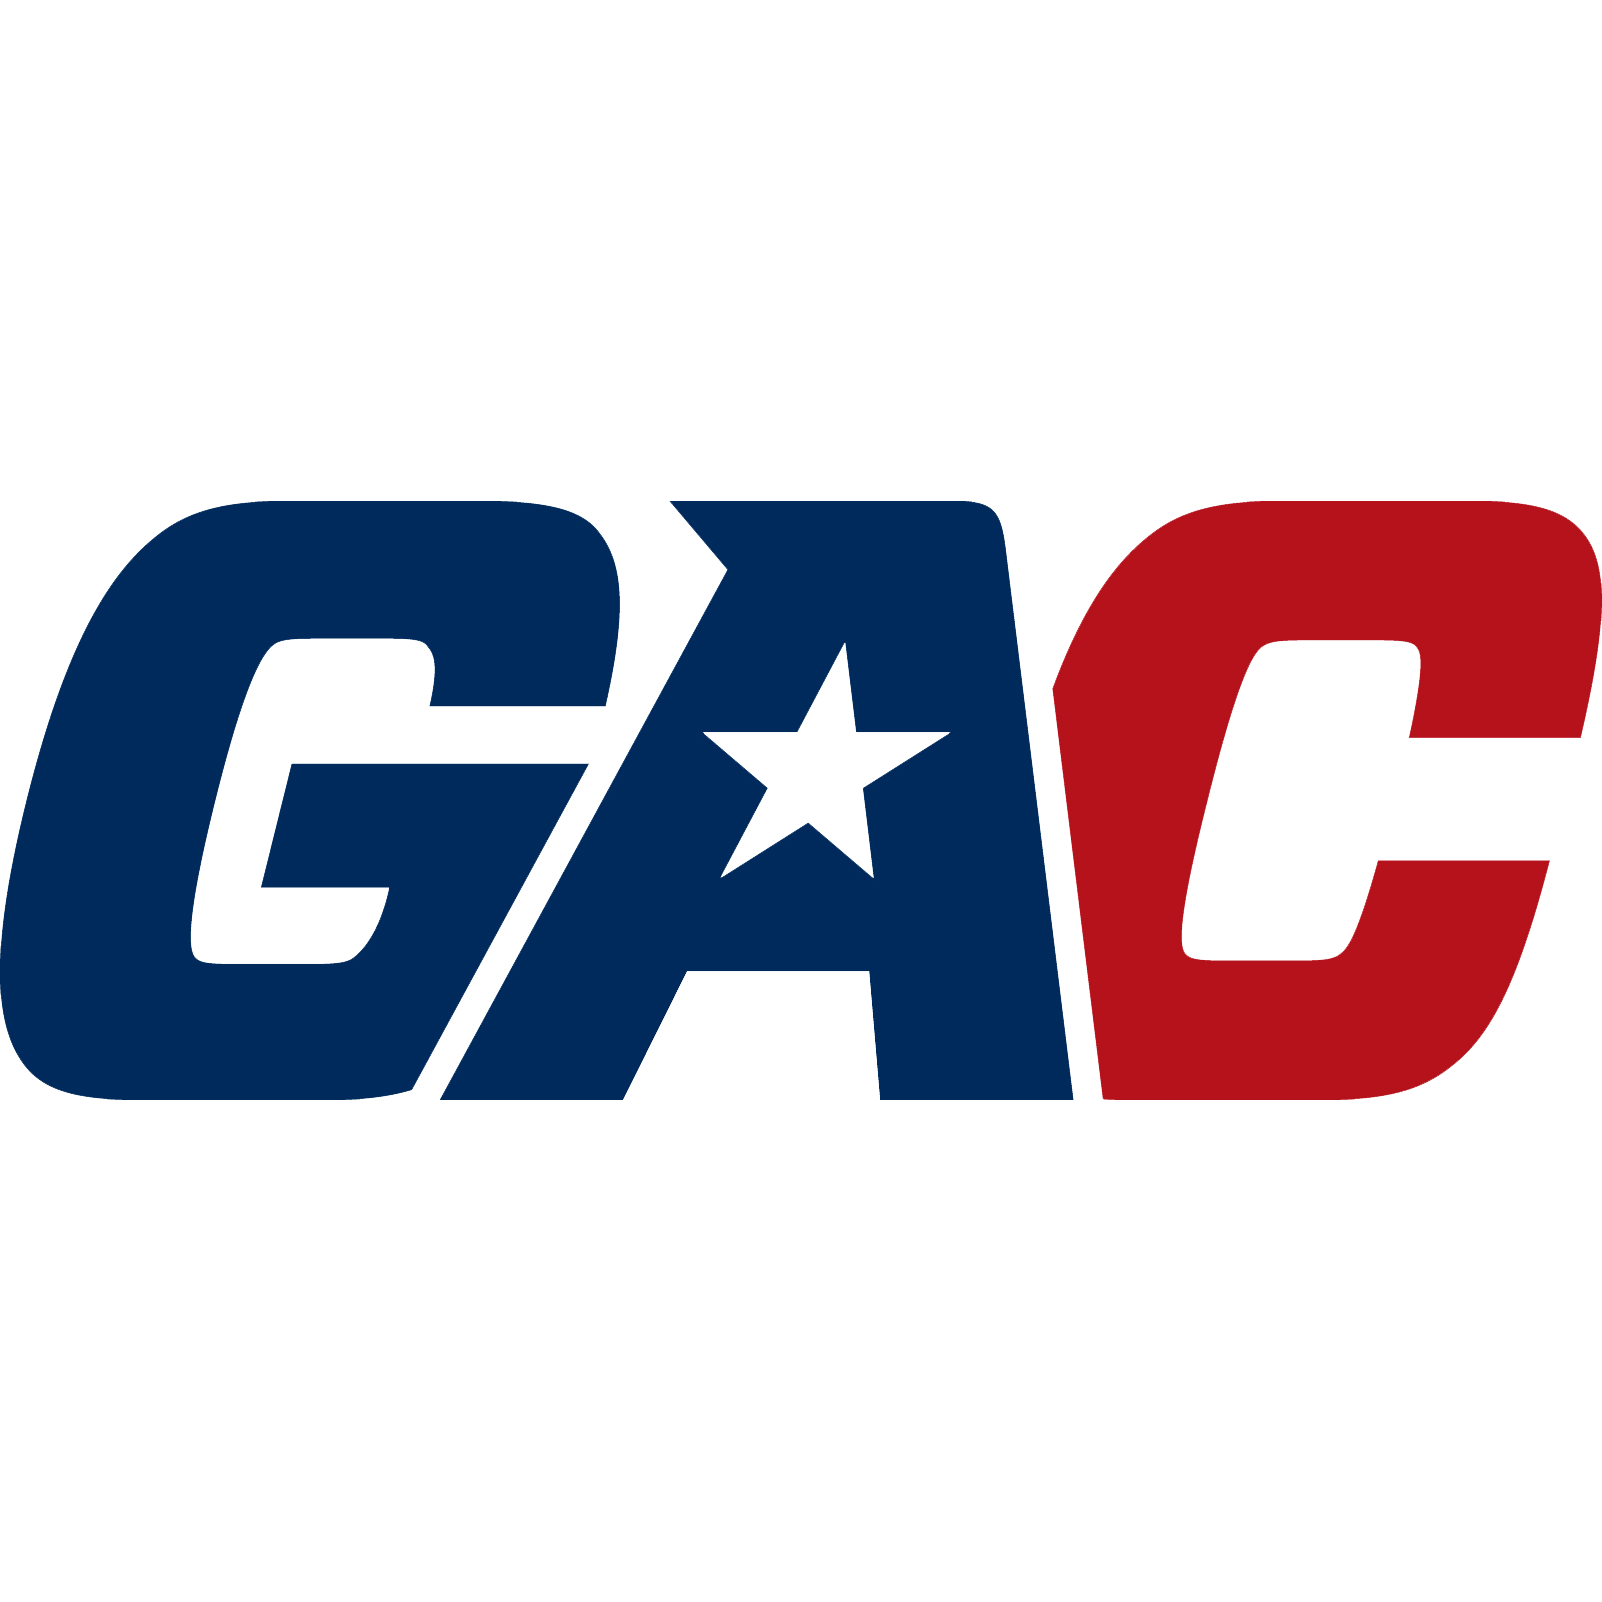 GAC Logo - D2 FOOTBALL PROFILE: Great American Conference